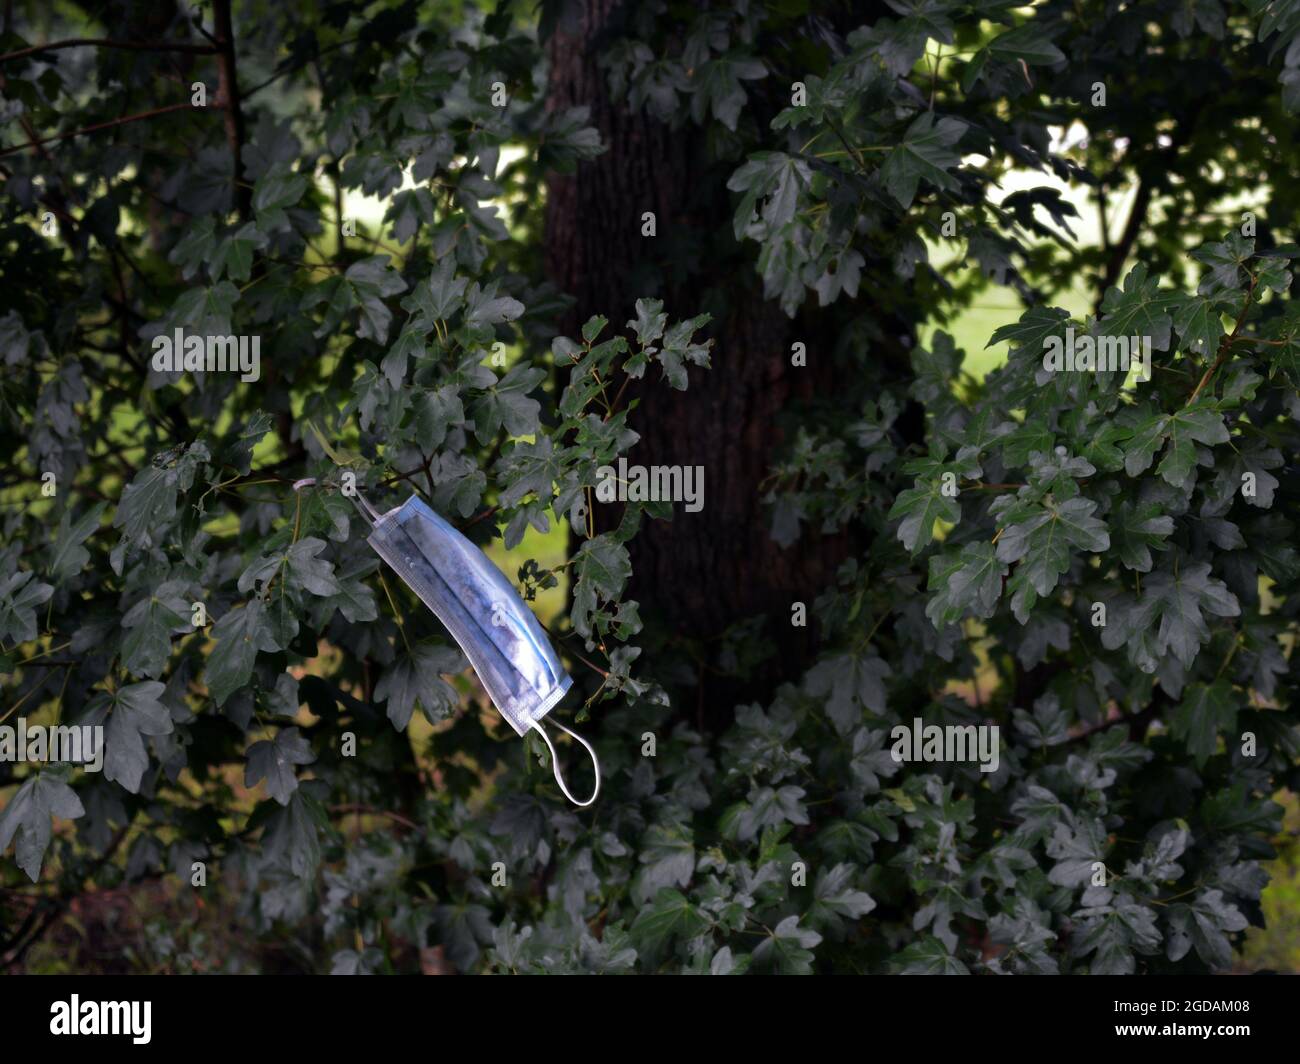 A medical mask hanging on a branch Stock Photo